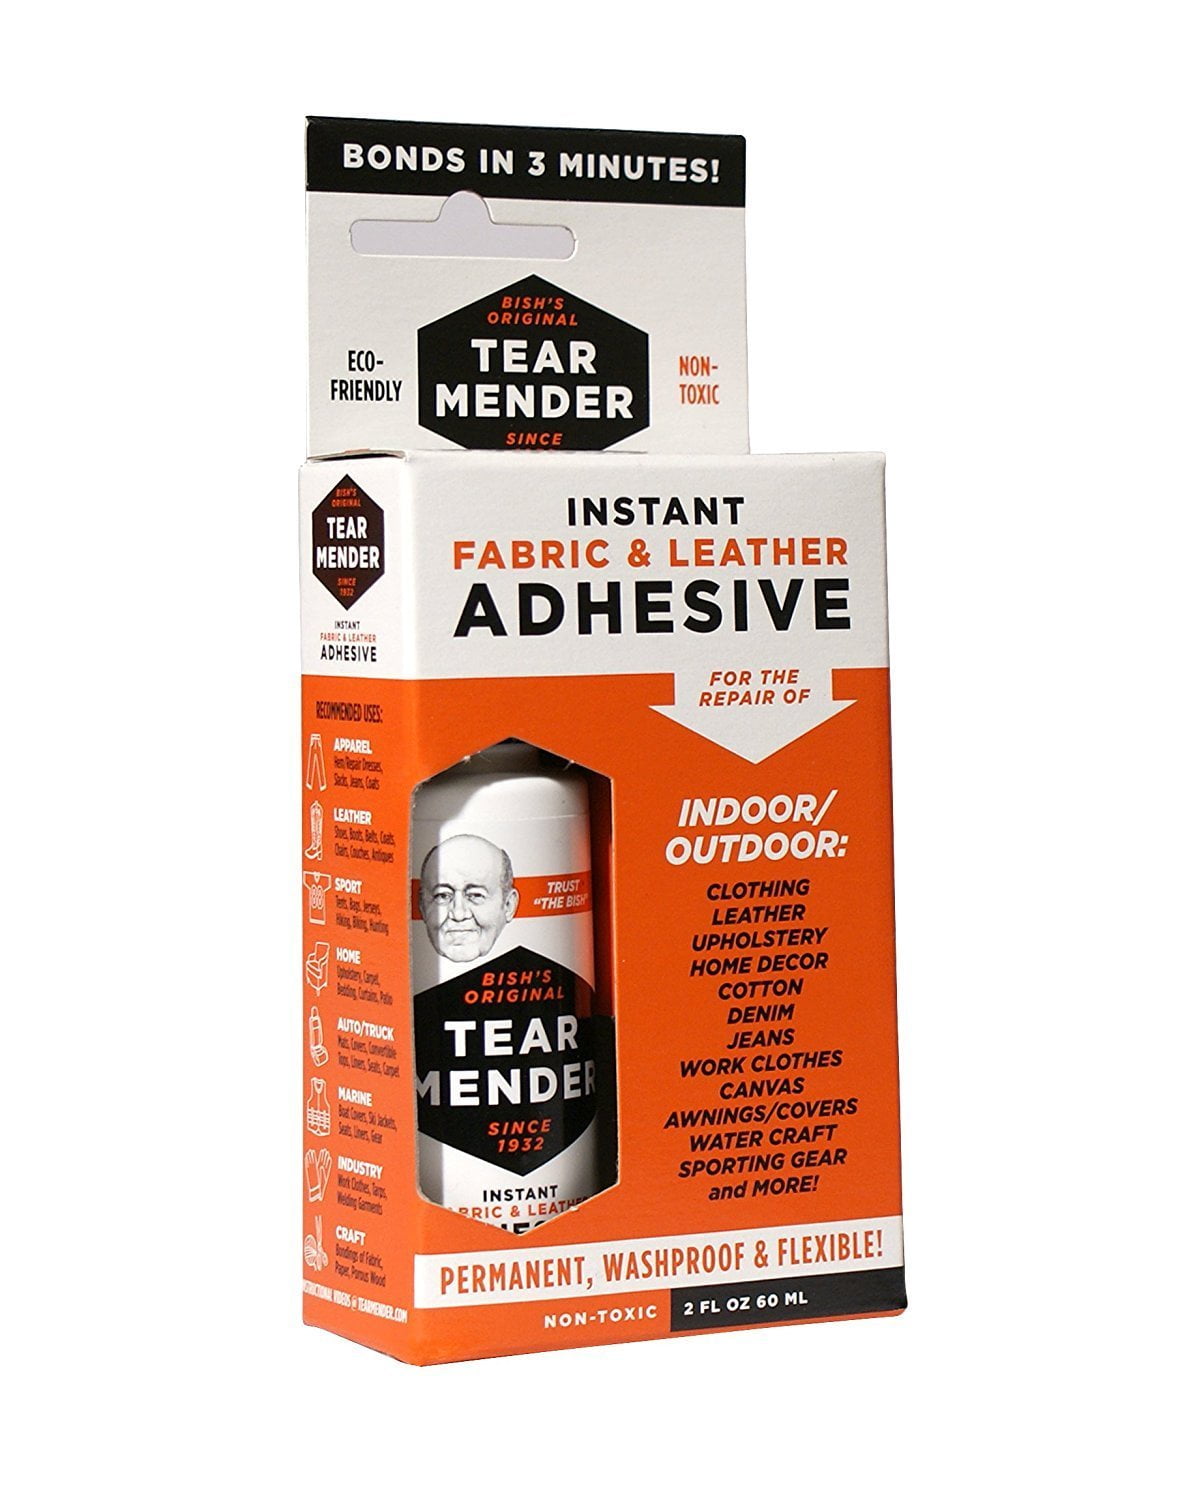 Tear Mender Instant Fabric and Leather Adhesive, 2 oz. Bottle, 12 Pack, Tm-1-c12, Men's, Size: 2 oz. Bottle - 12 Pack, Other